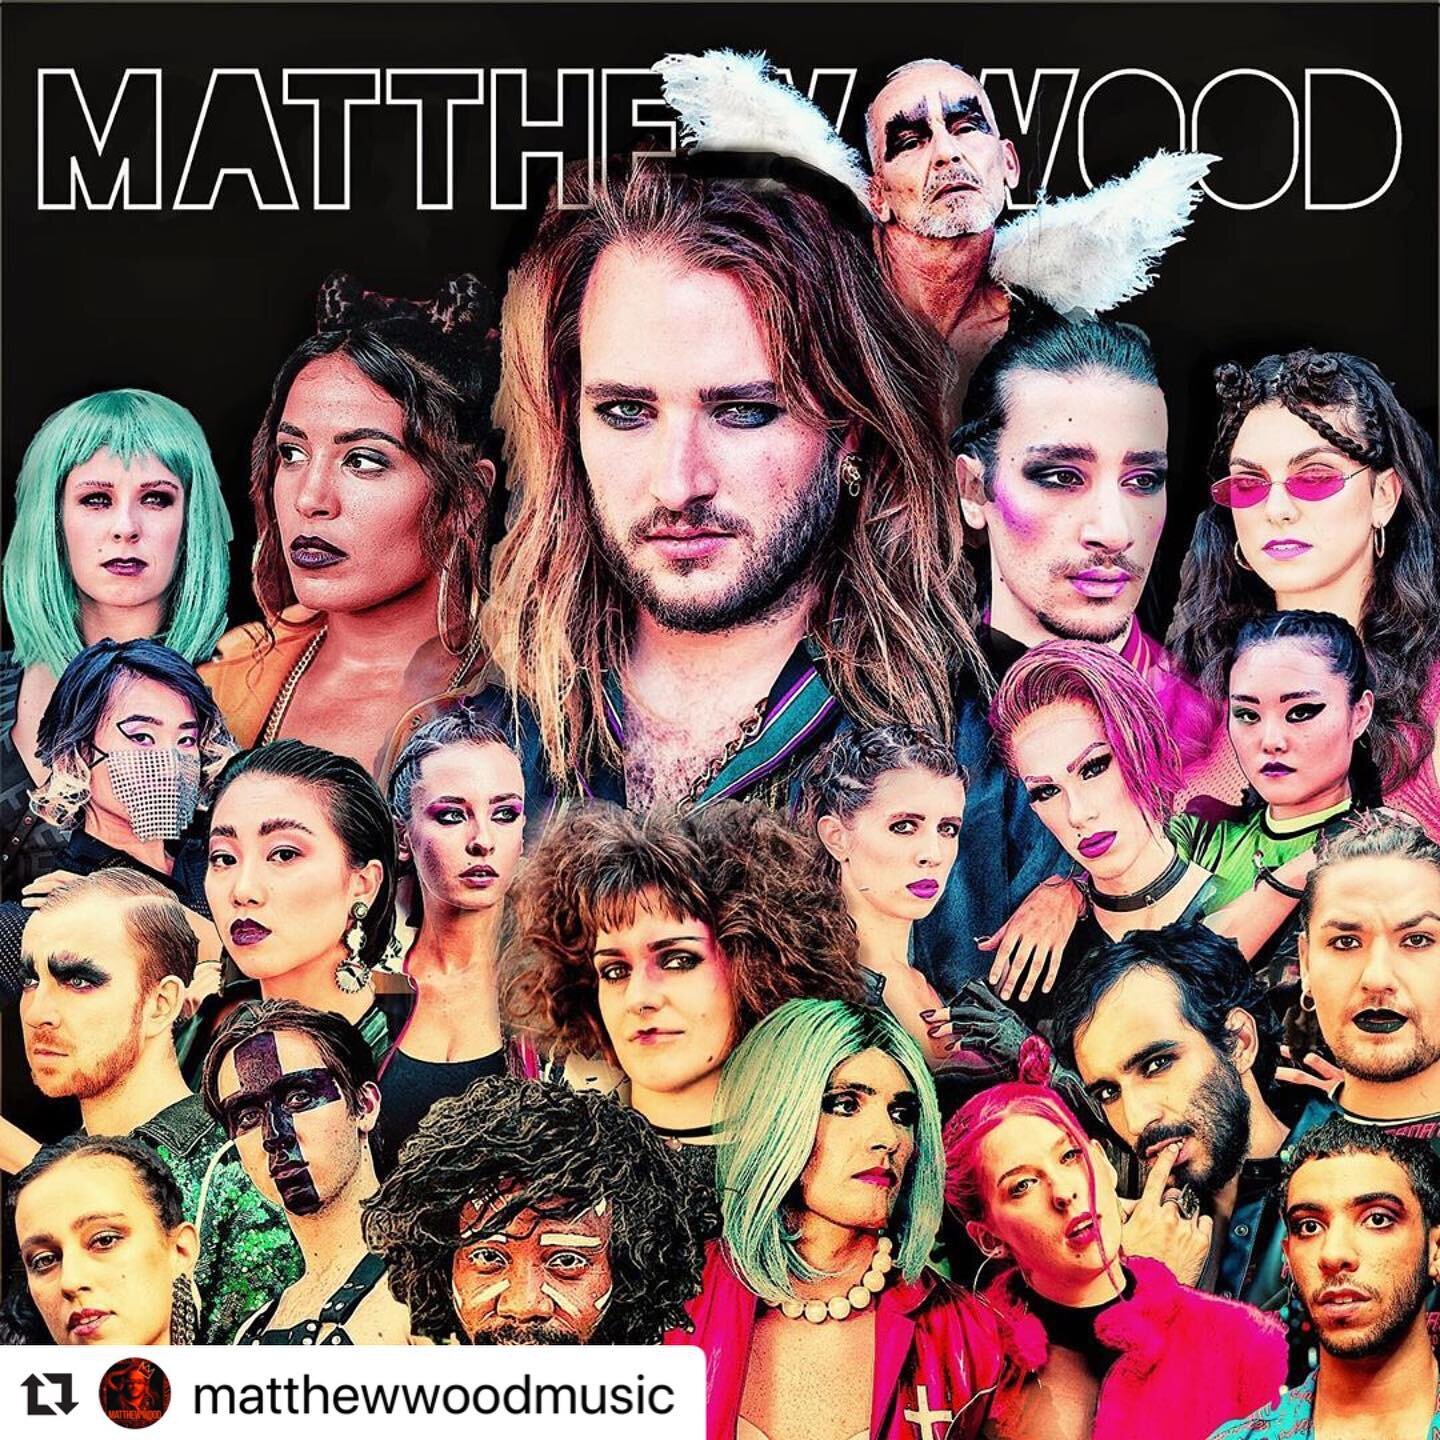 #Repost @matthewwoodmusic with @make_repost
・・・
🐍 Tomorrow 🐍

For all those who cannot wait any longer - there will be a exclusive video premiere today at 3pm on BLU. 🤘
@matthewwoodmusic will post the link later in his bio ✌️

#matthewwood #wood #